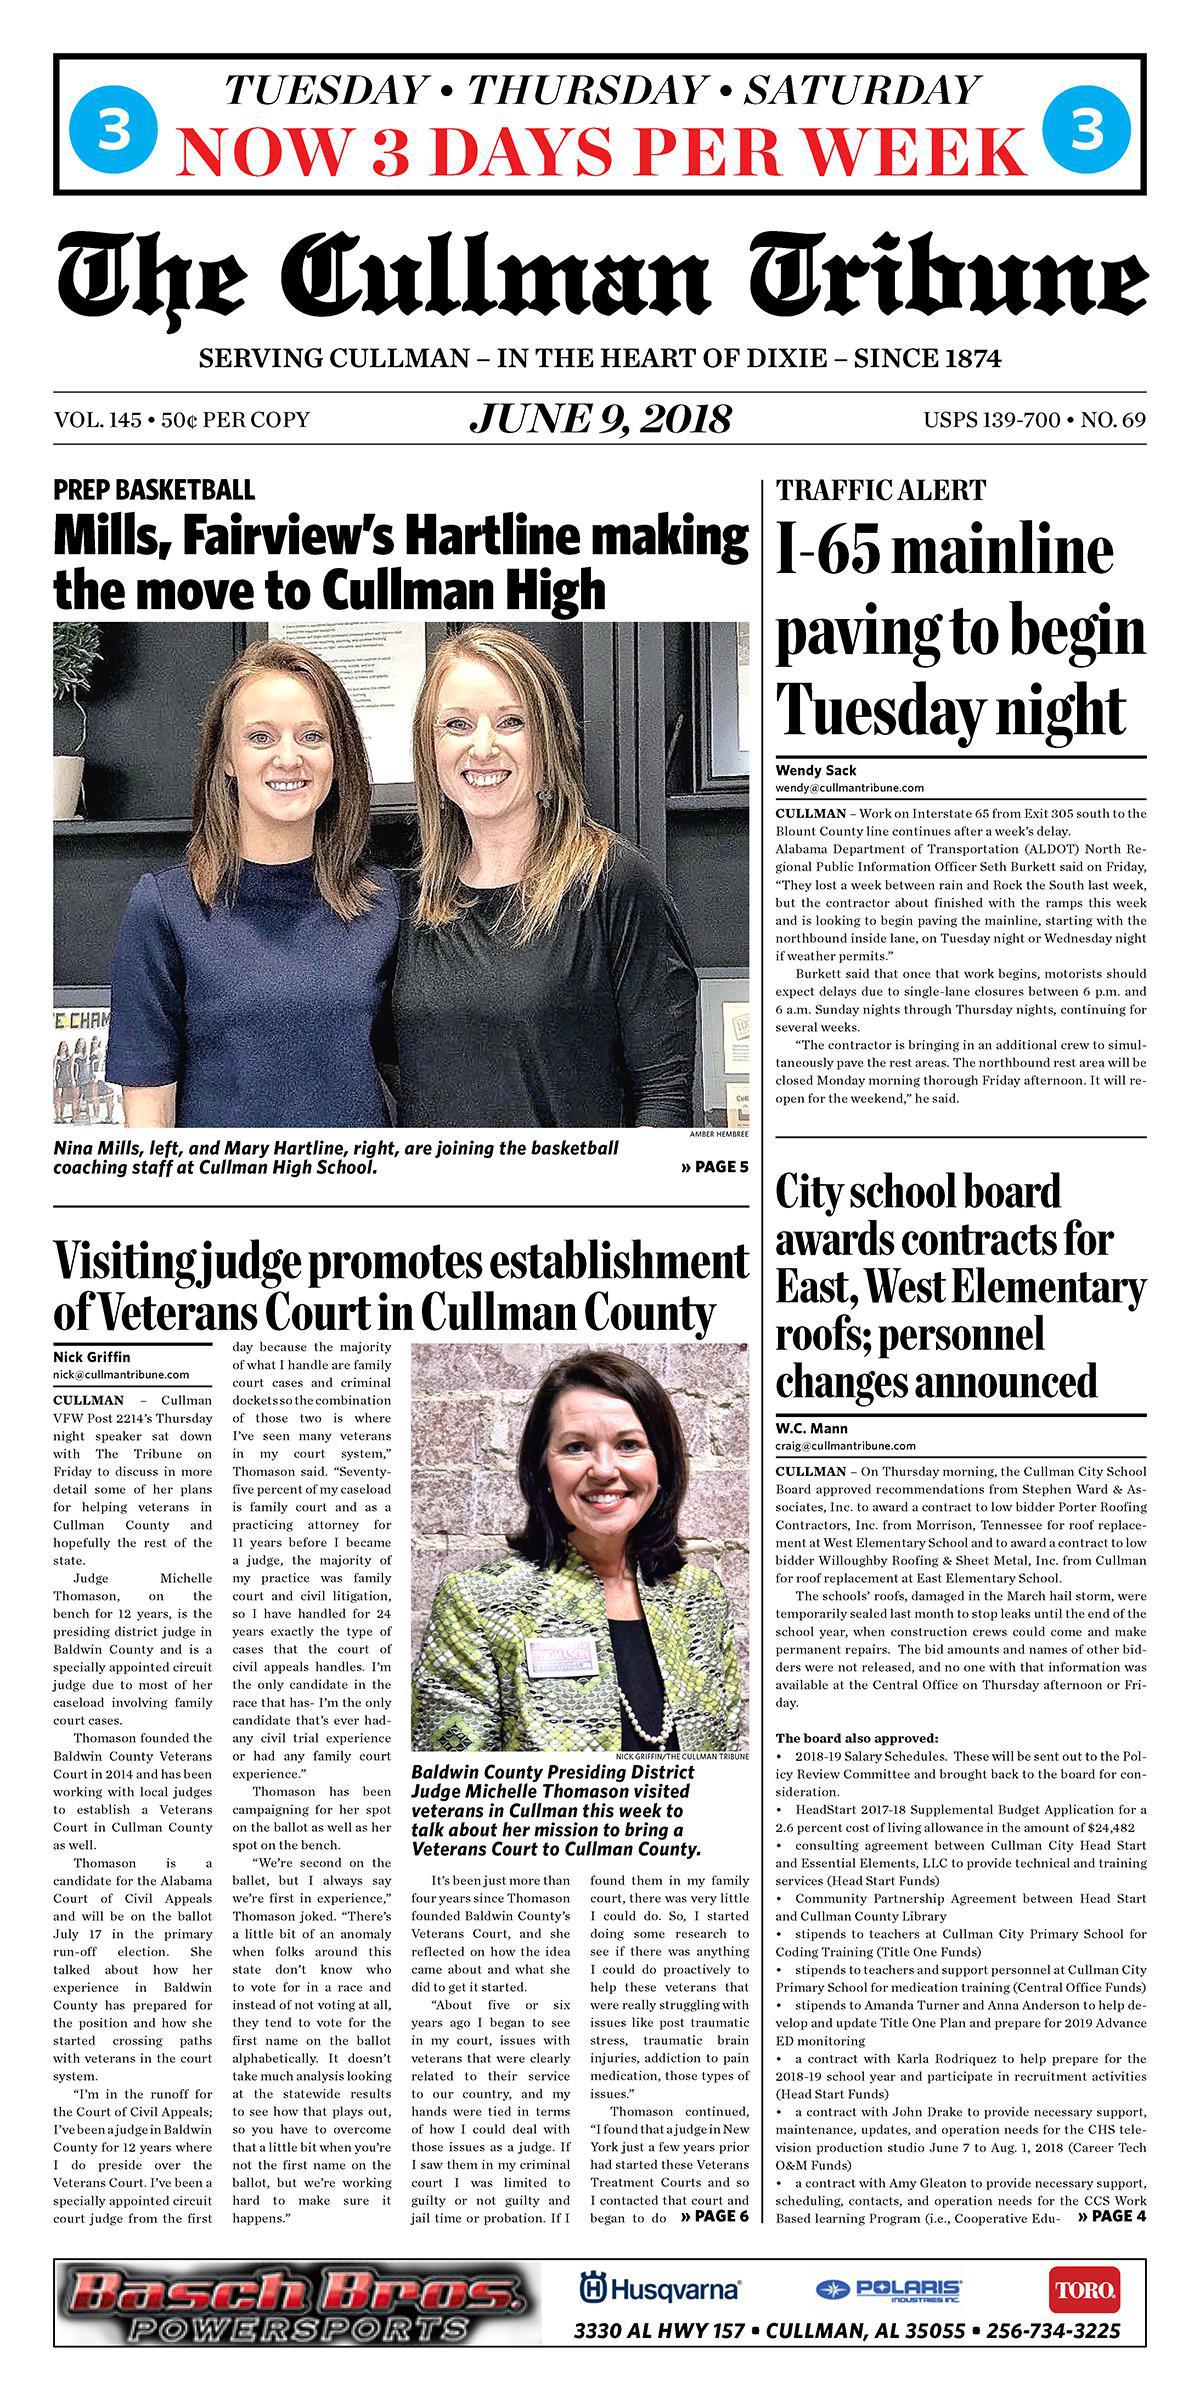 Good Morning Cullman! The 06-09-2018 edition of the Cullman Tribune is now ready to view